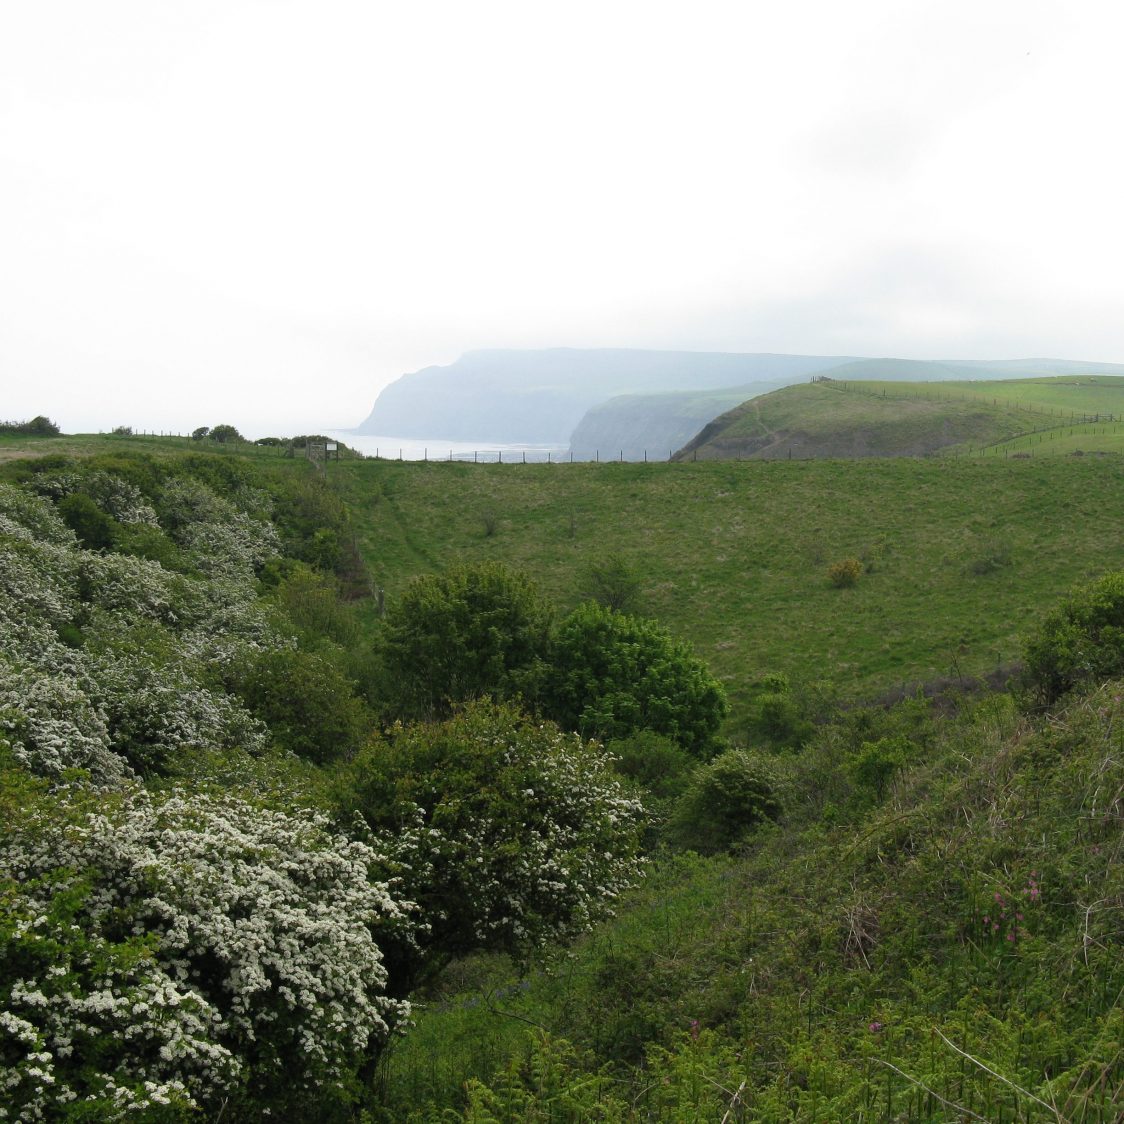 A view over the small valley that shelters Cattersty Gill from the harsh coastal climate. Green grassland is visible to the right and flowering hawthorn to the left. Distant misty cliffs along the coast are visible in the background.